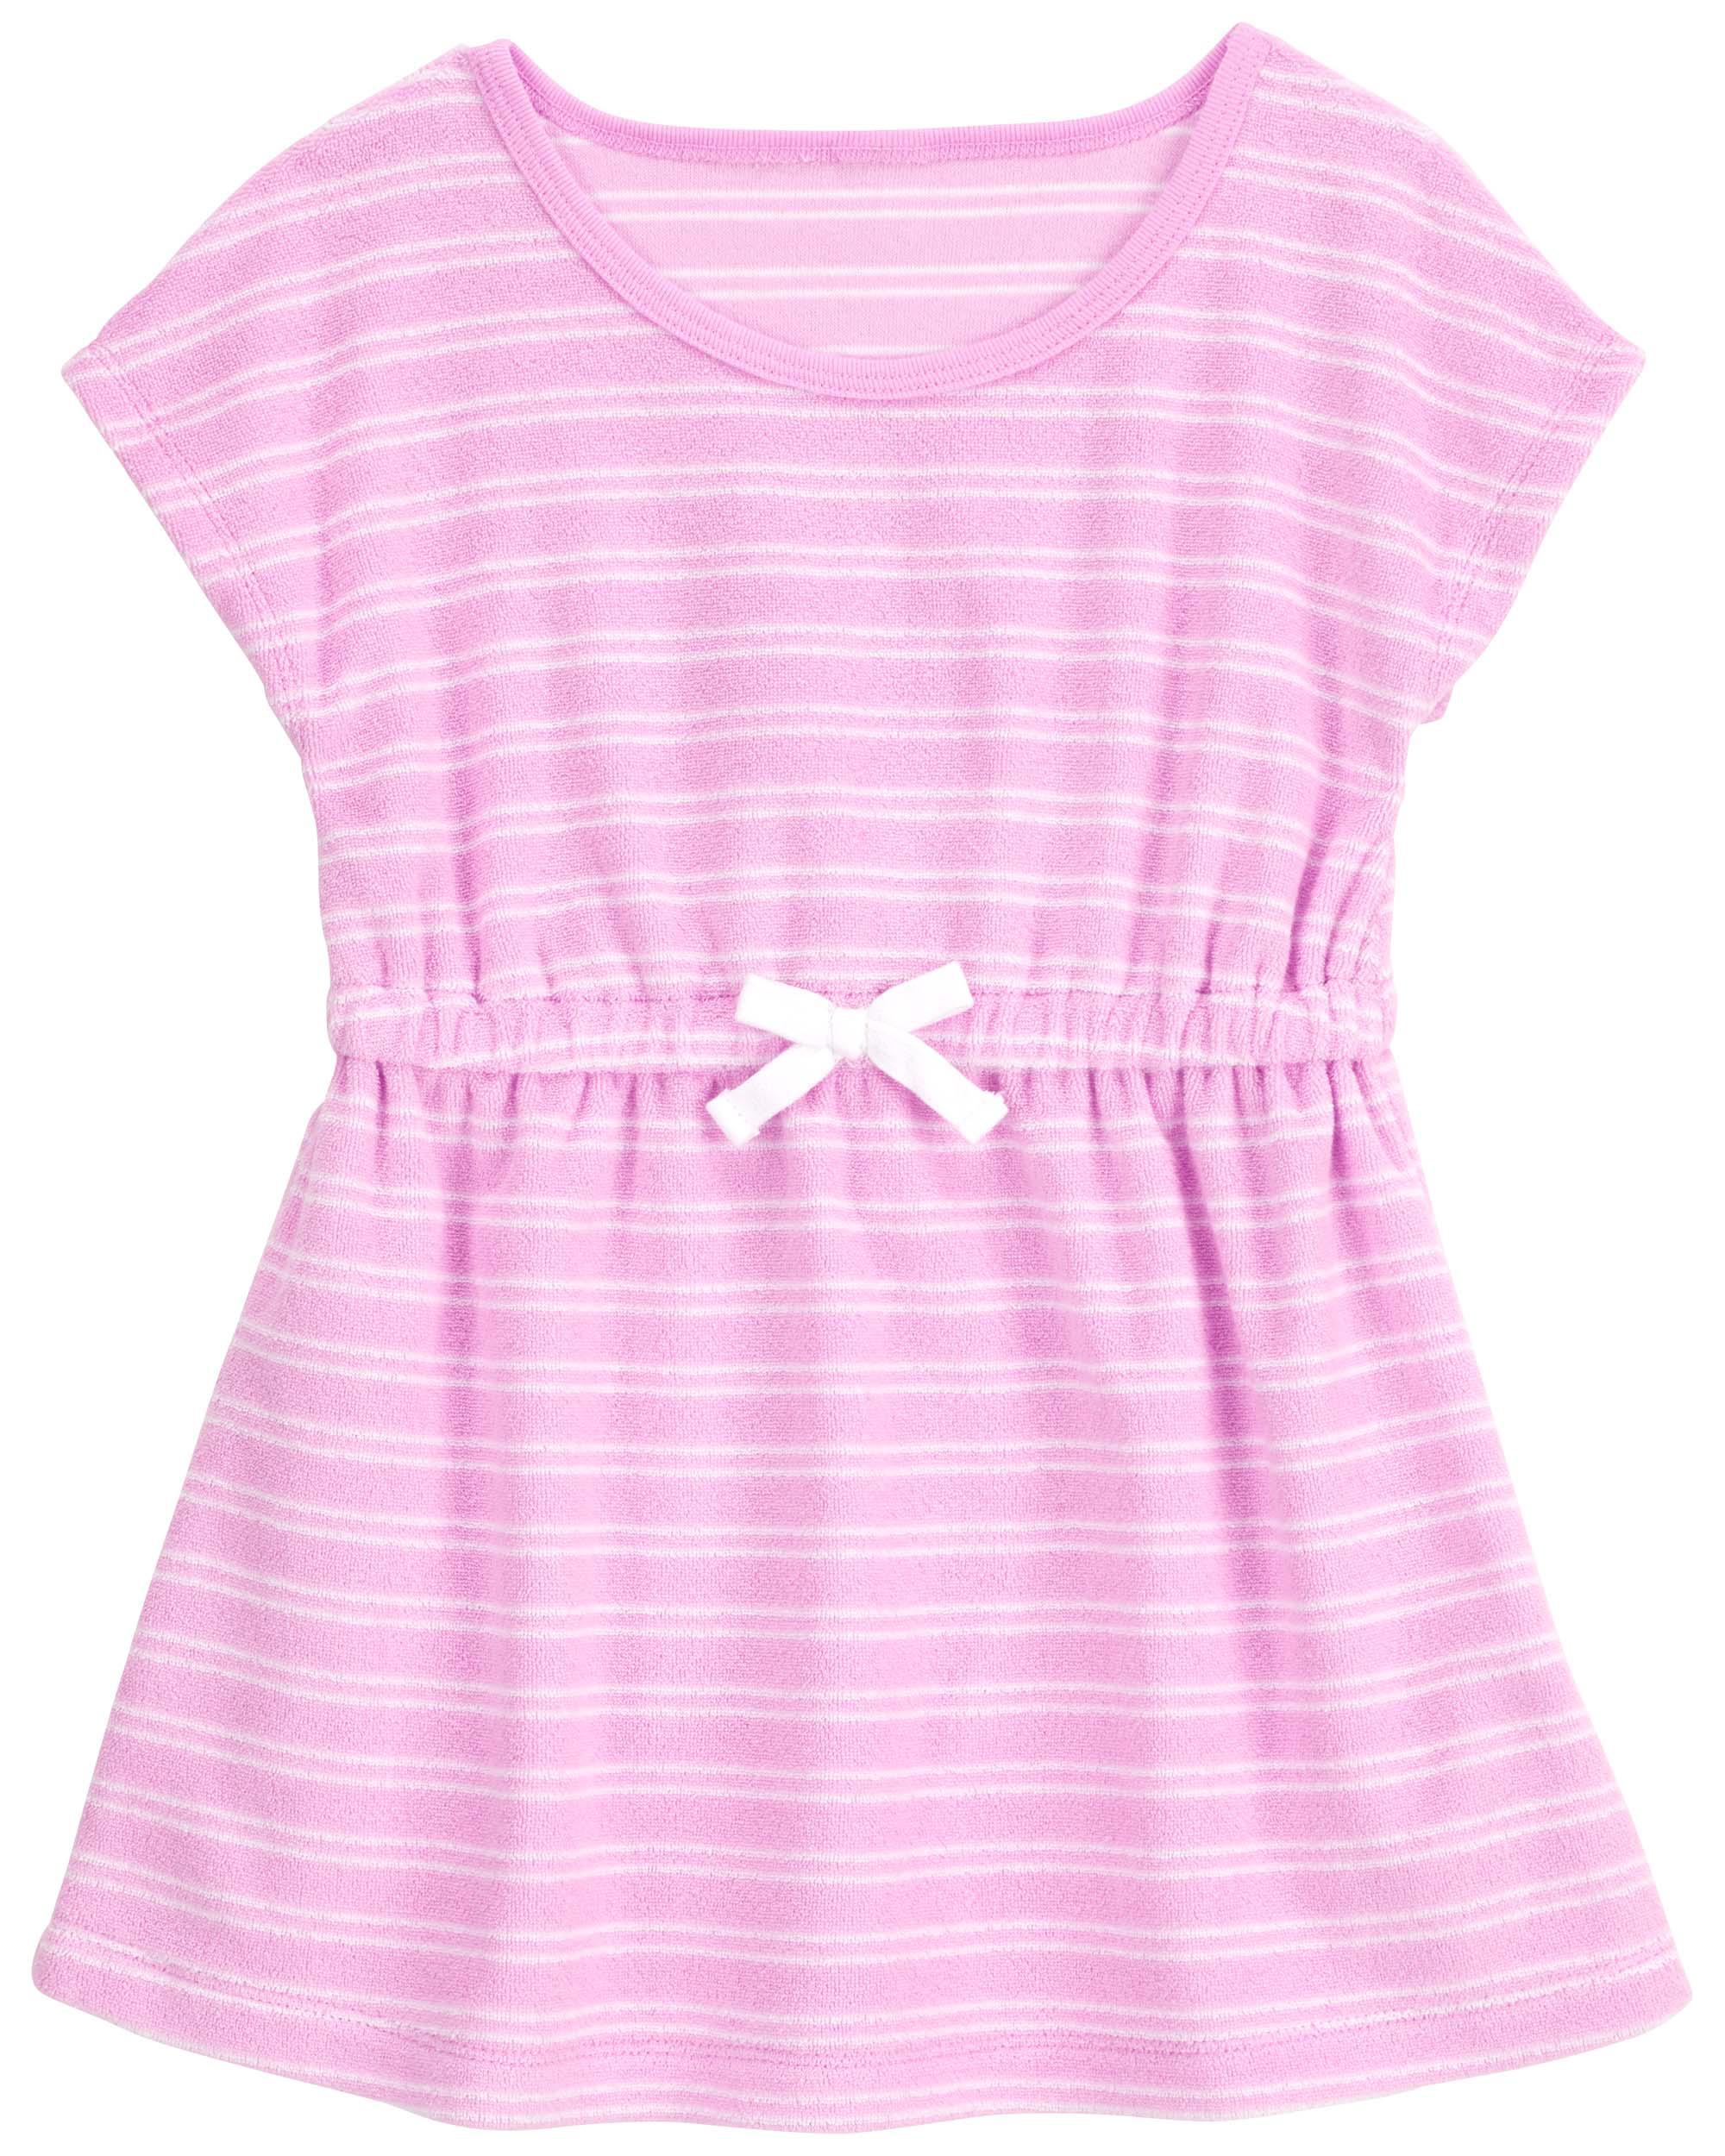 Toddler Striped Terry Swimsuit Cover-Up